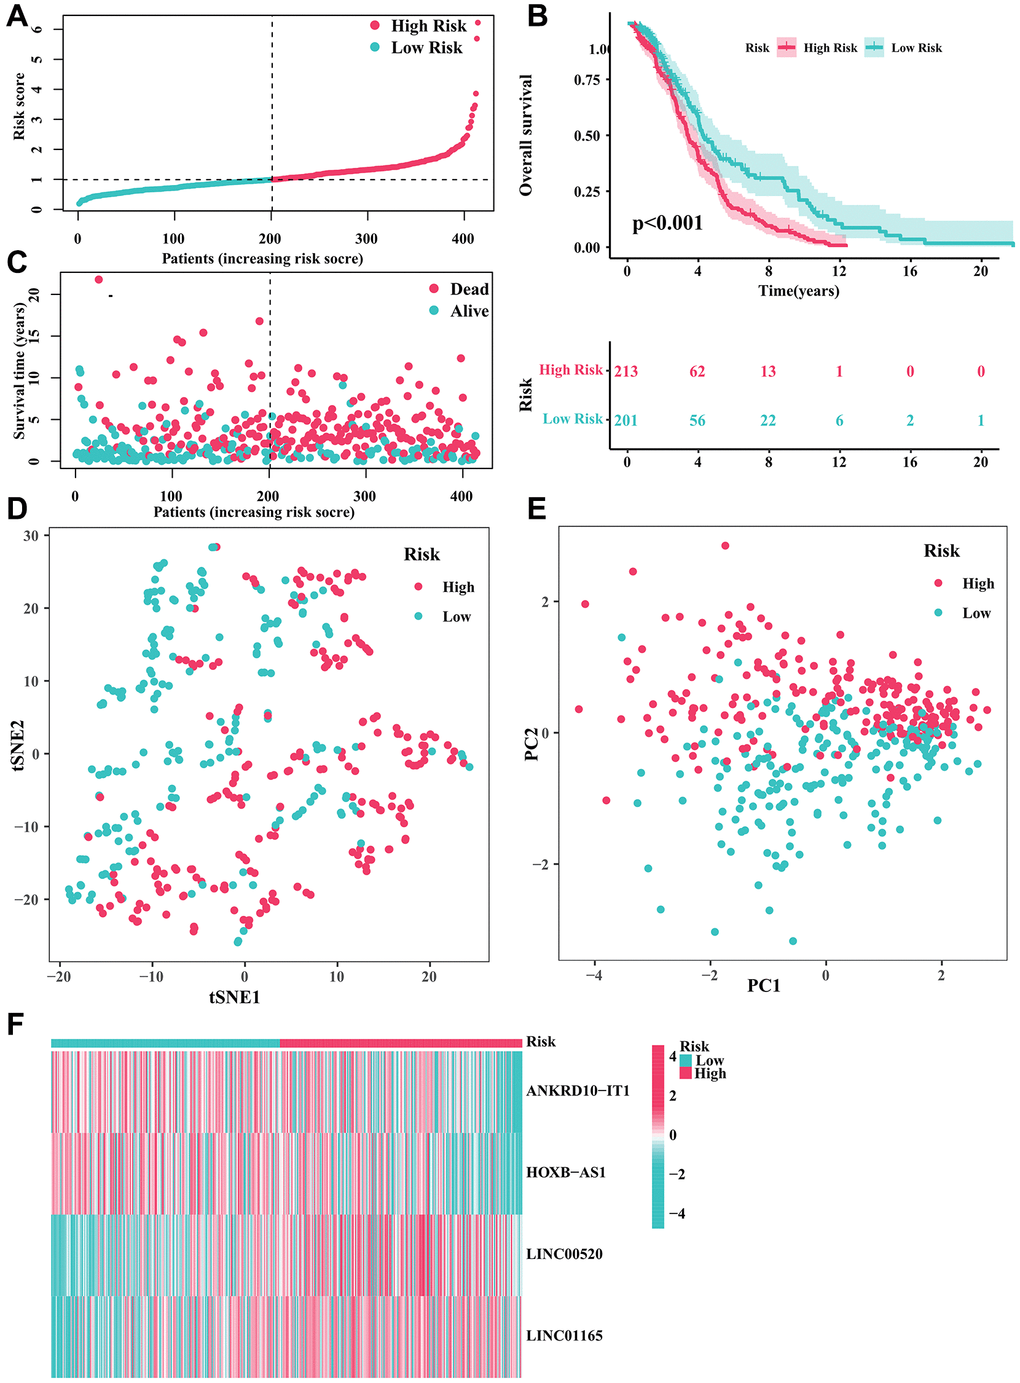 Developing a predictive risk model using the CRIRLs in DLBCL. (A) Distribution of the patients’ normalized risk score. (B) Analysis of clinical prognosis in low-risk and high-risk groups of DLBCL samples. (C) Patients’ survival status along with their risk score. (D) t-SNE analysis. (E) PCA analysis. (F) The heatmap diagram of the expression of 4 prognostic CRIRLs.